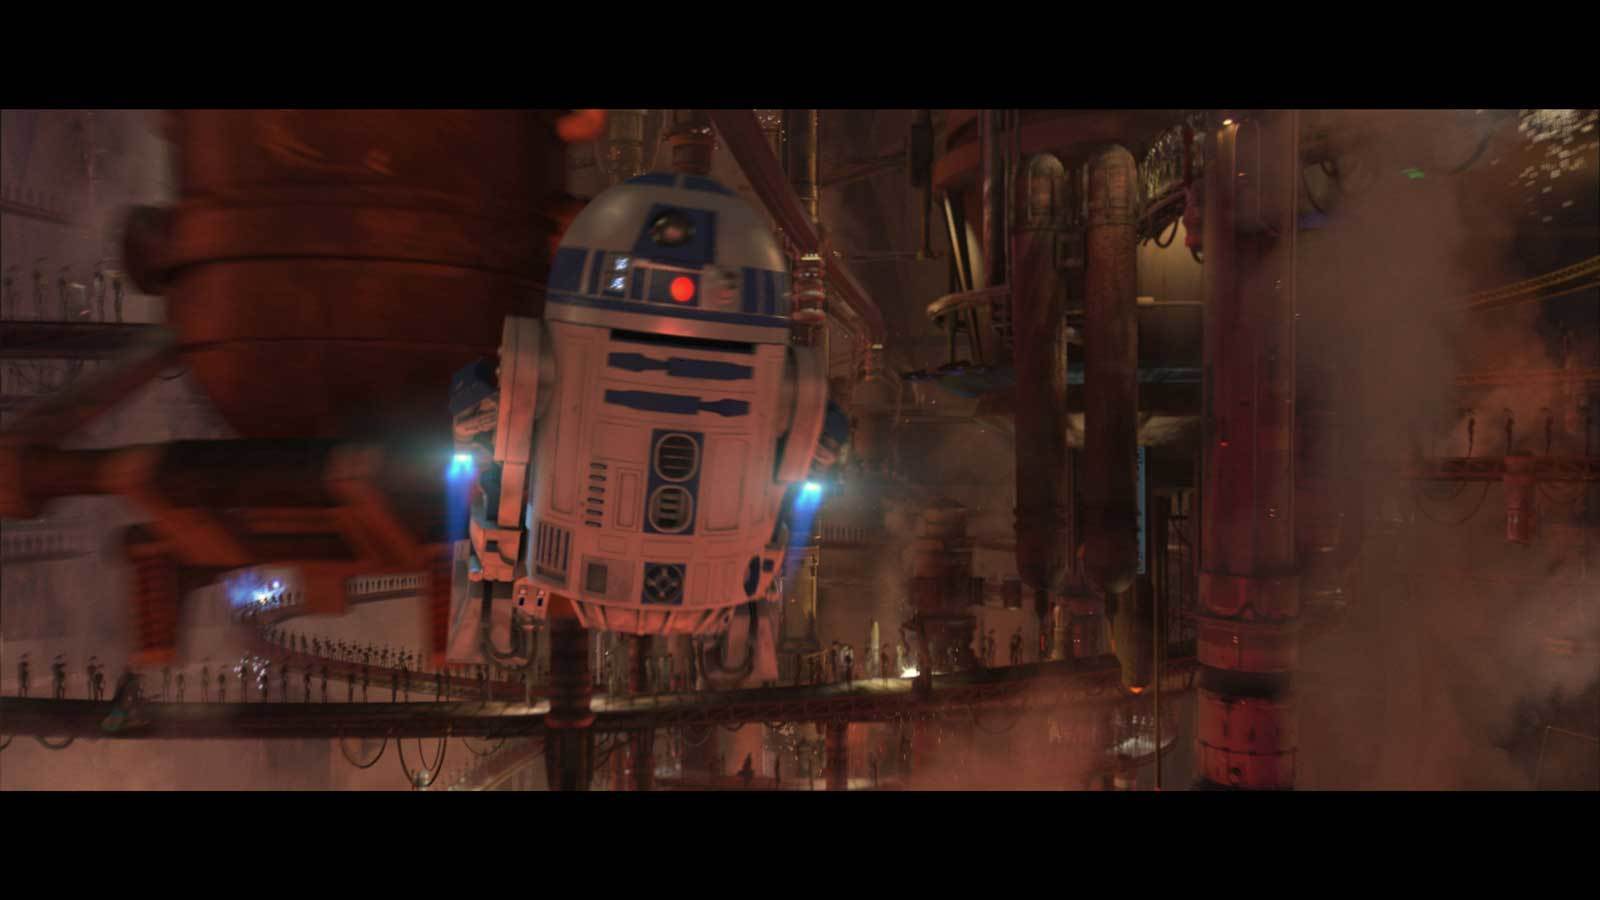 In Geonosis's droid factory, Artoo saved Padmé from immolation in a crucible, jetting to a comput...